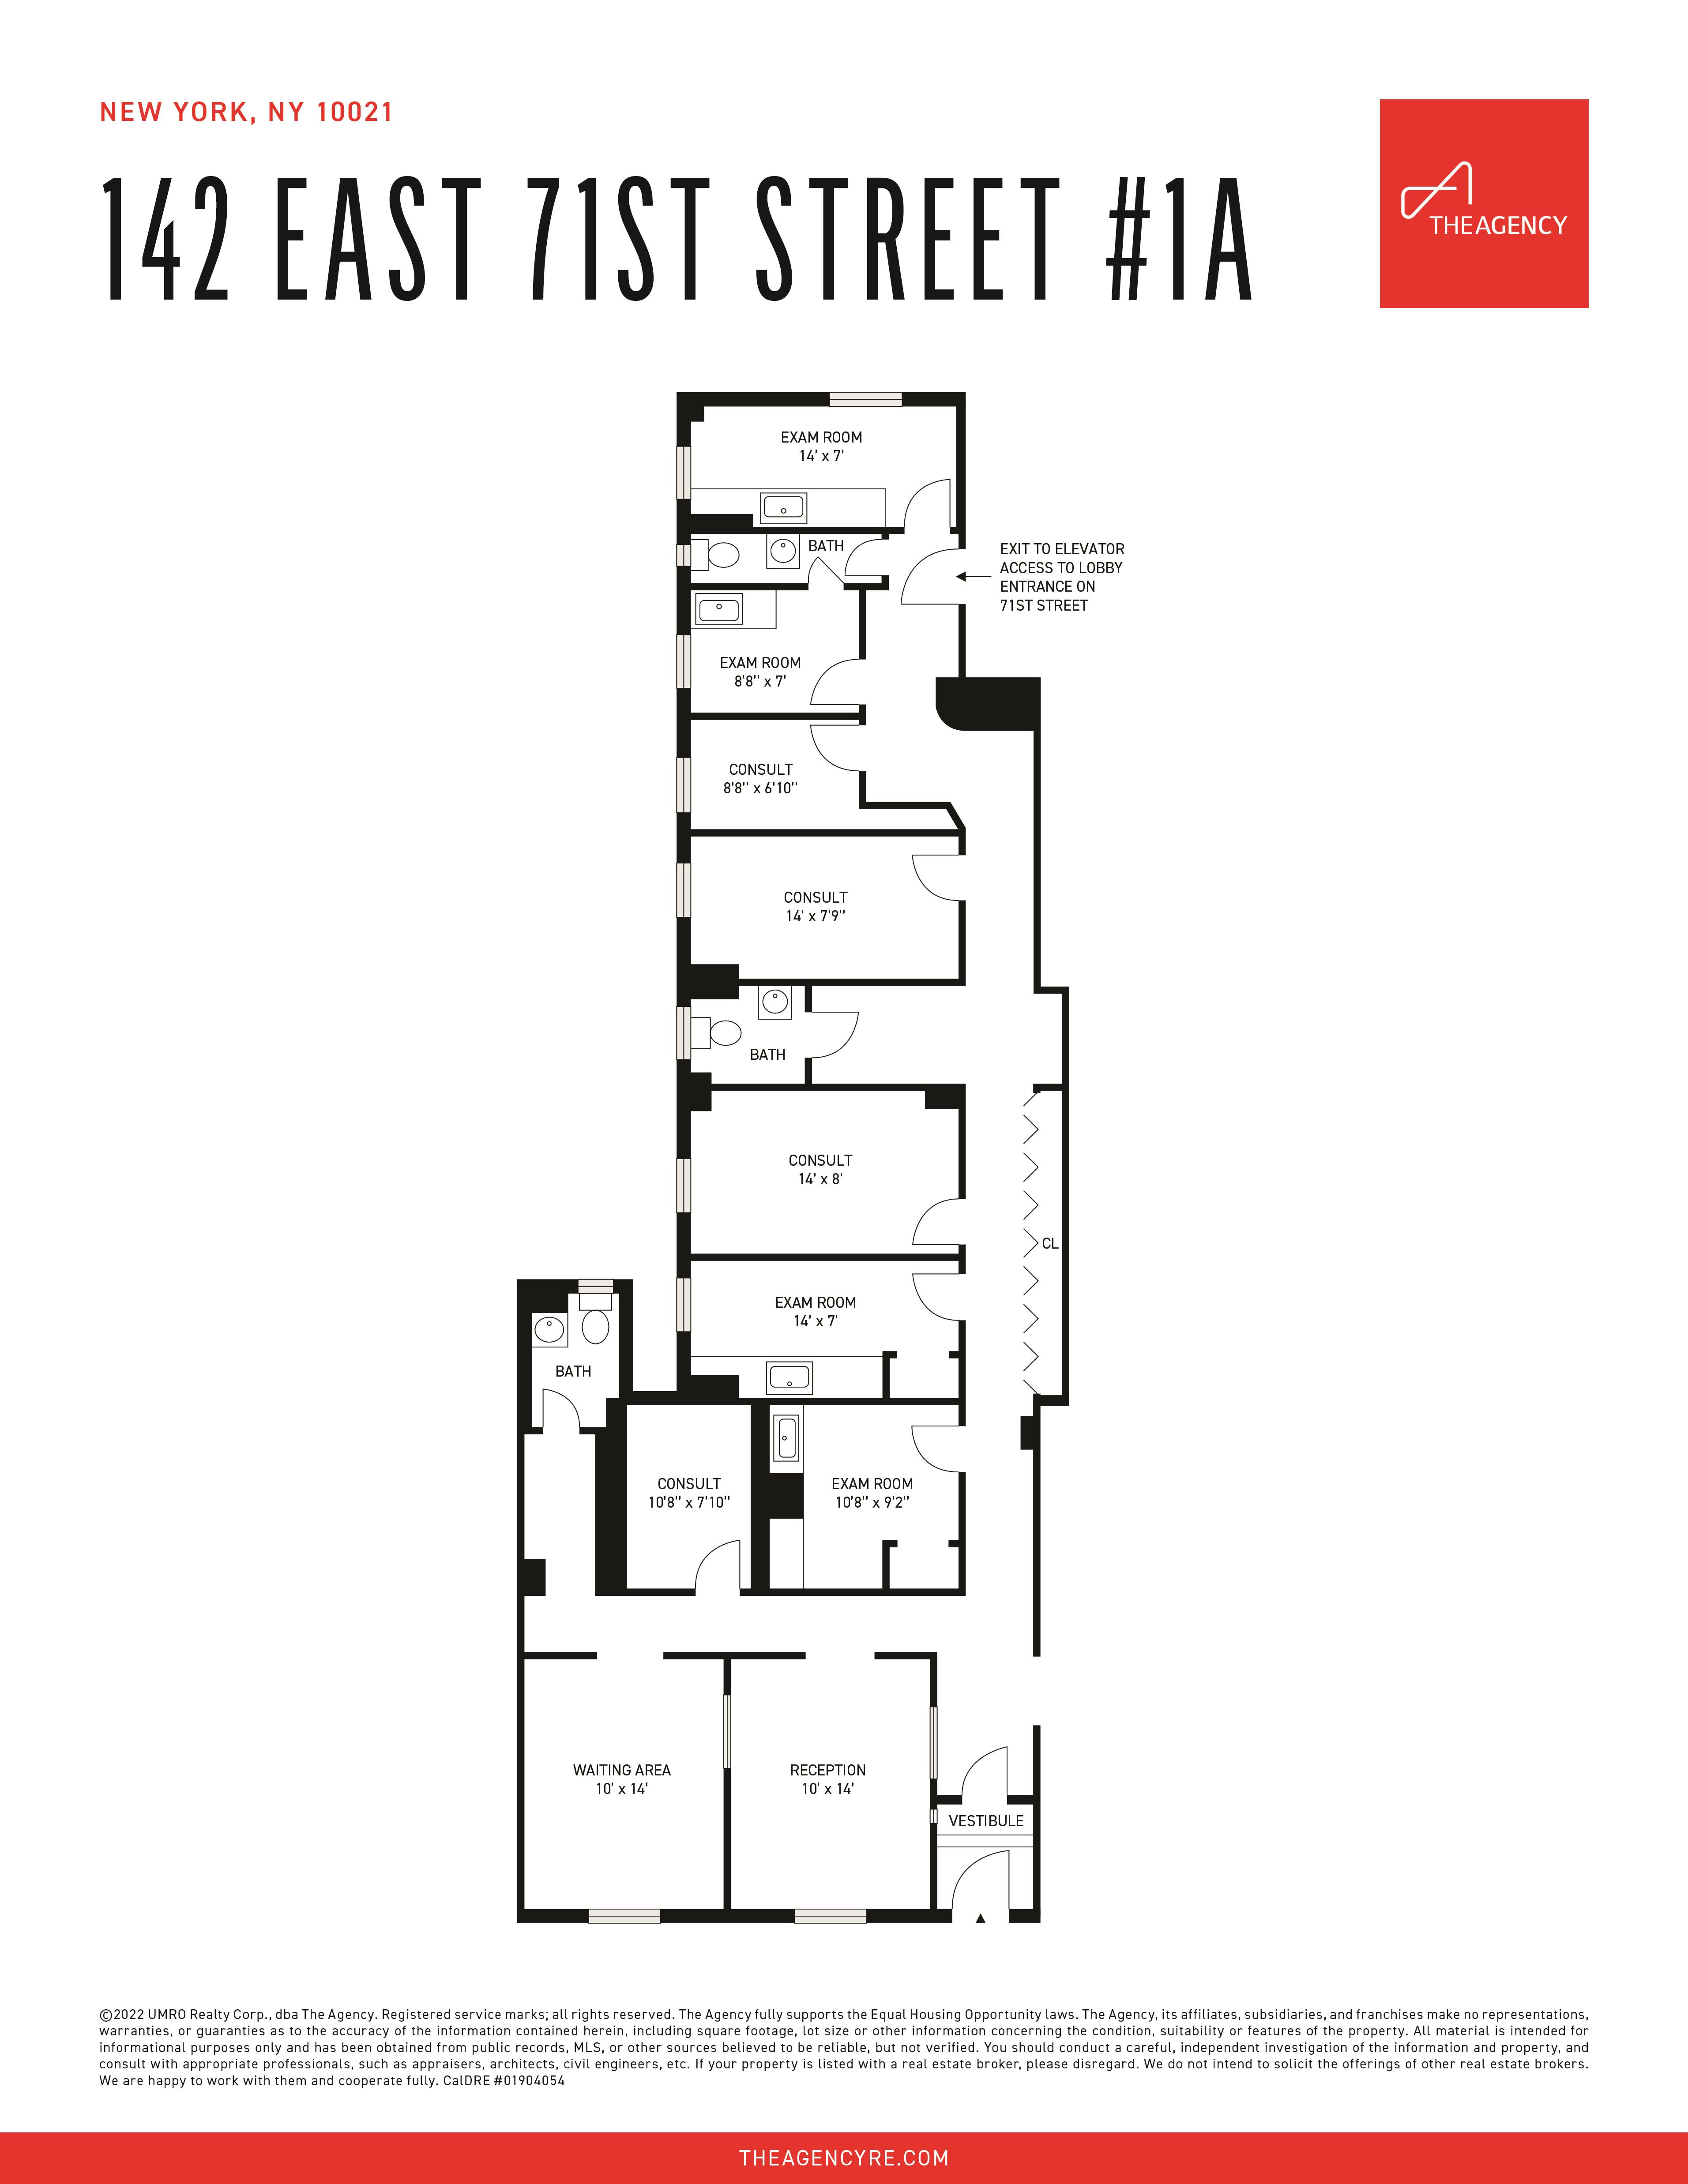 142 East 71st Street 1-A Upper East Side New York NY 10021